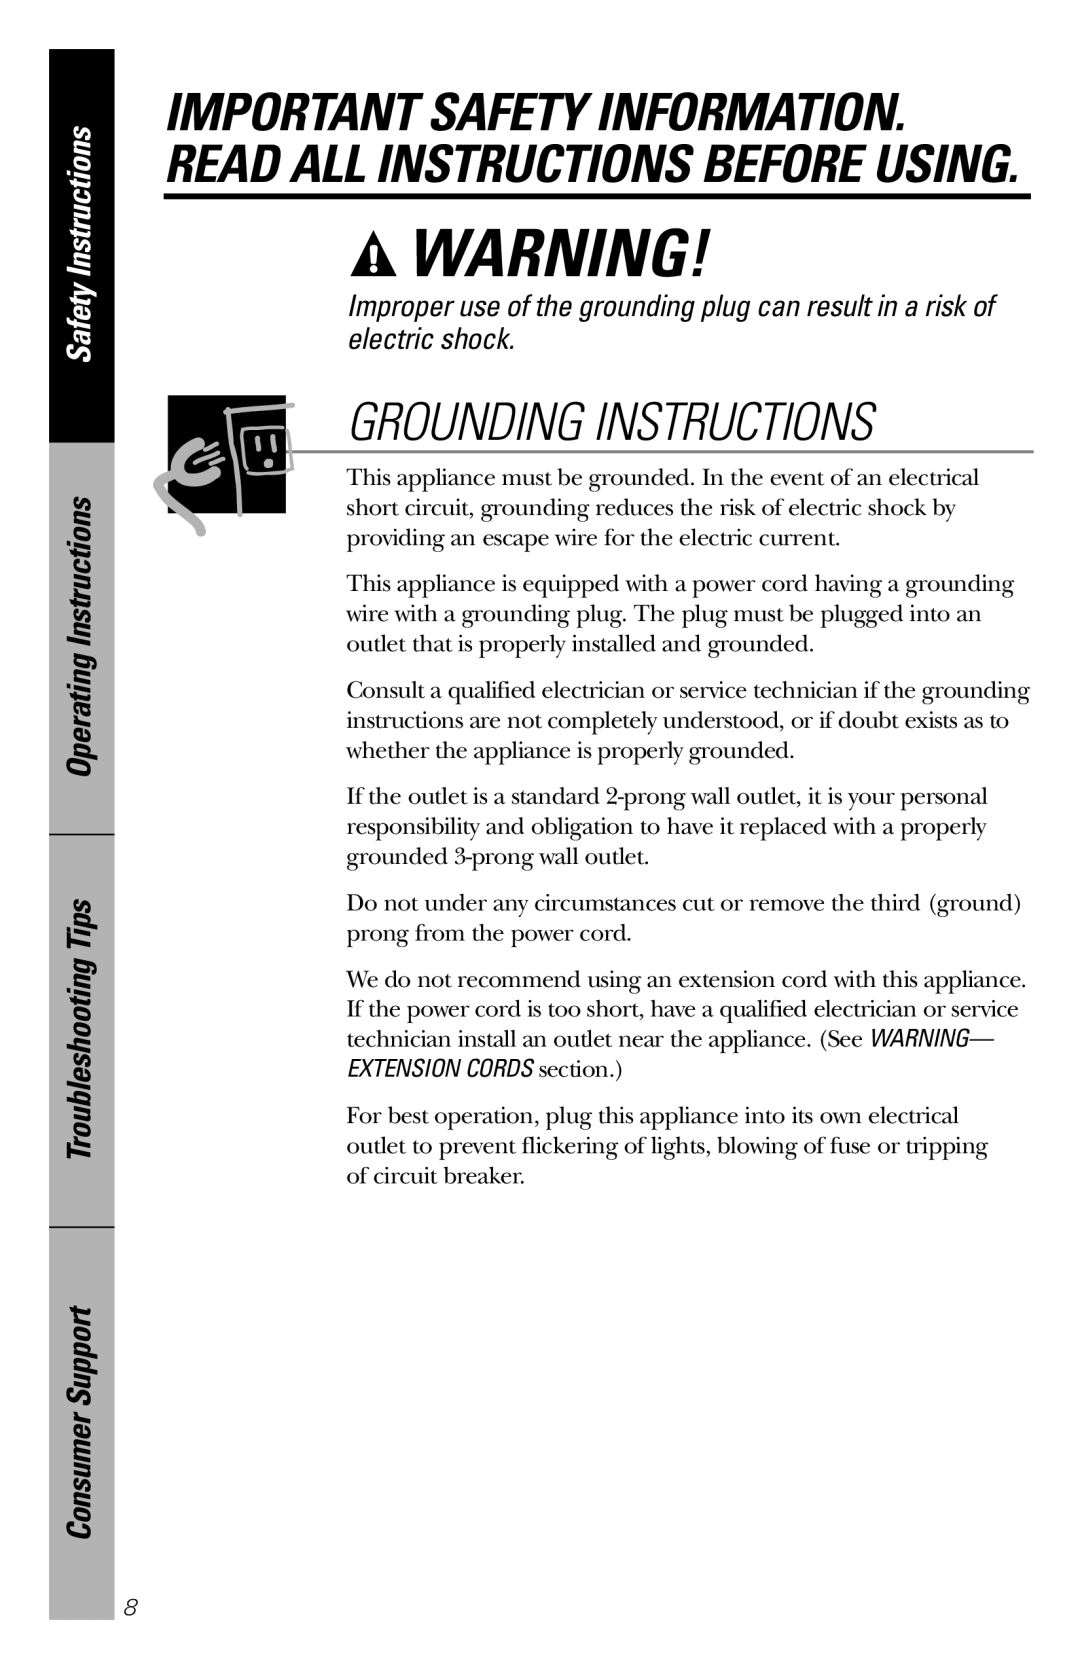 GE JES1456 Grounding Instructions, Important Safety Information. Read All Instructions Before Using, Safety Instructions 